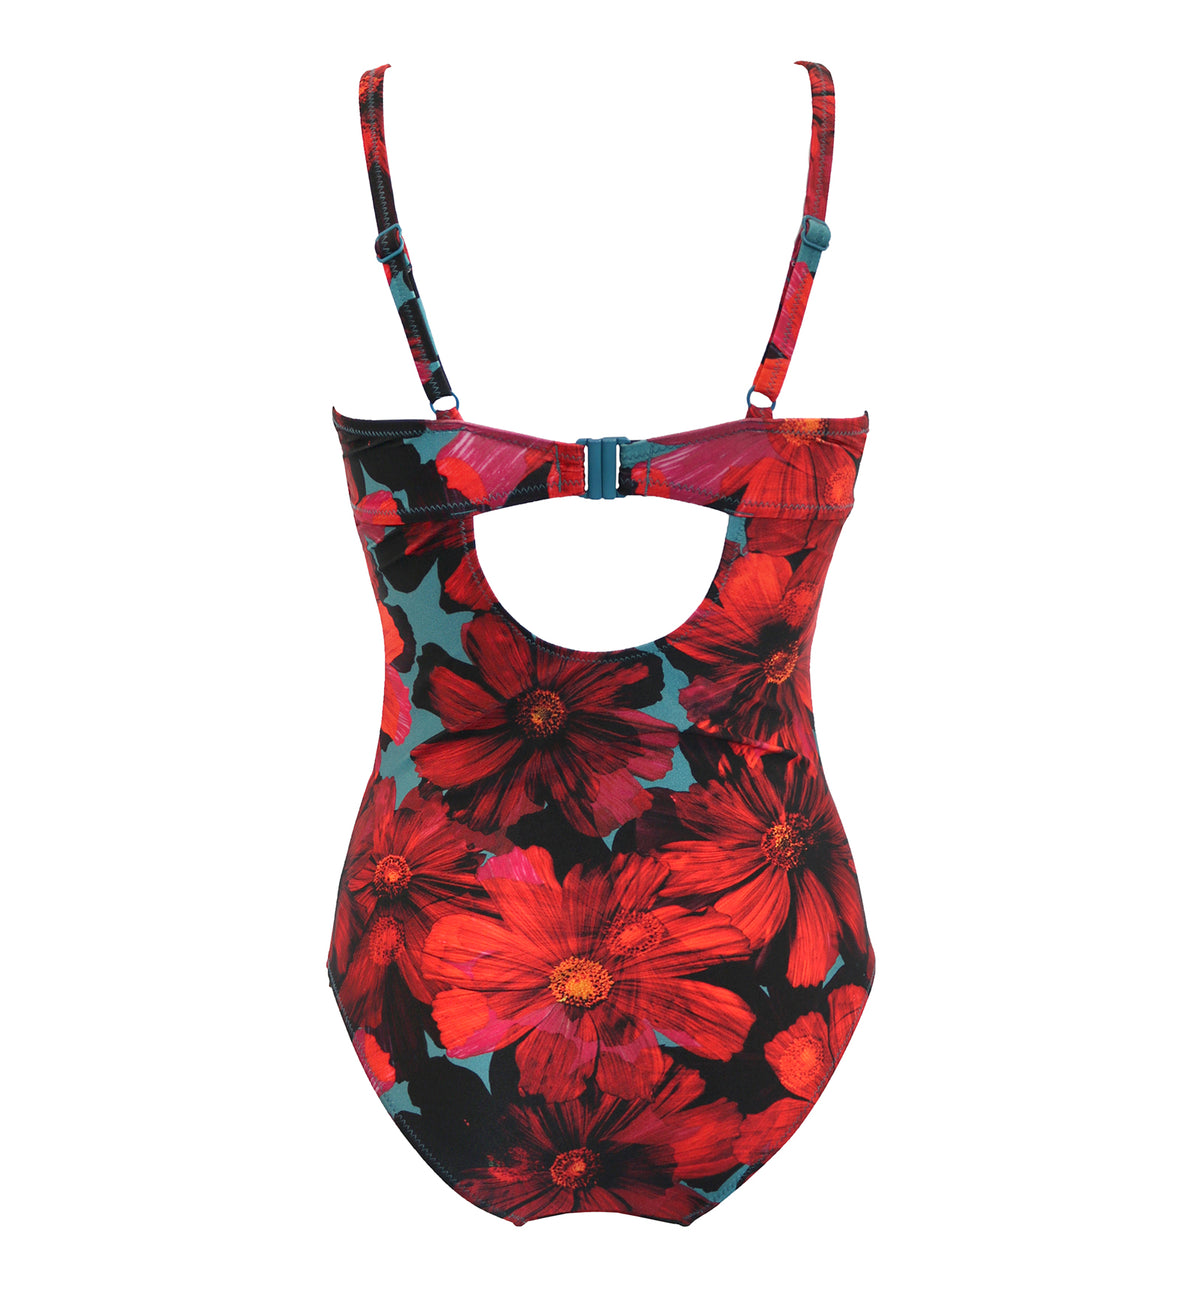 Pour Moi Orchid Luxe Padded Underwire Swimsuit (12907),32E,Red/Teal - Red/Teal,32E